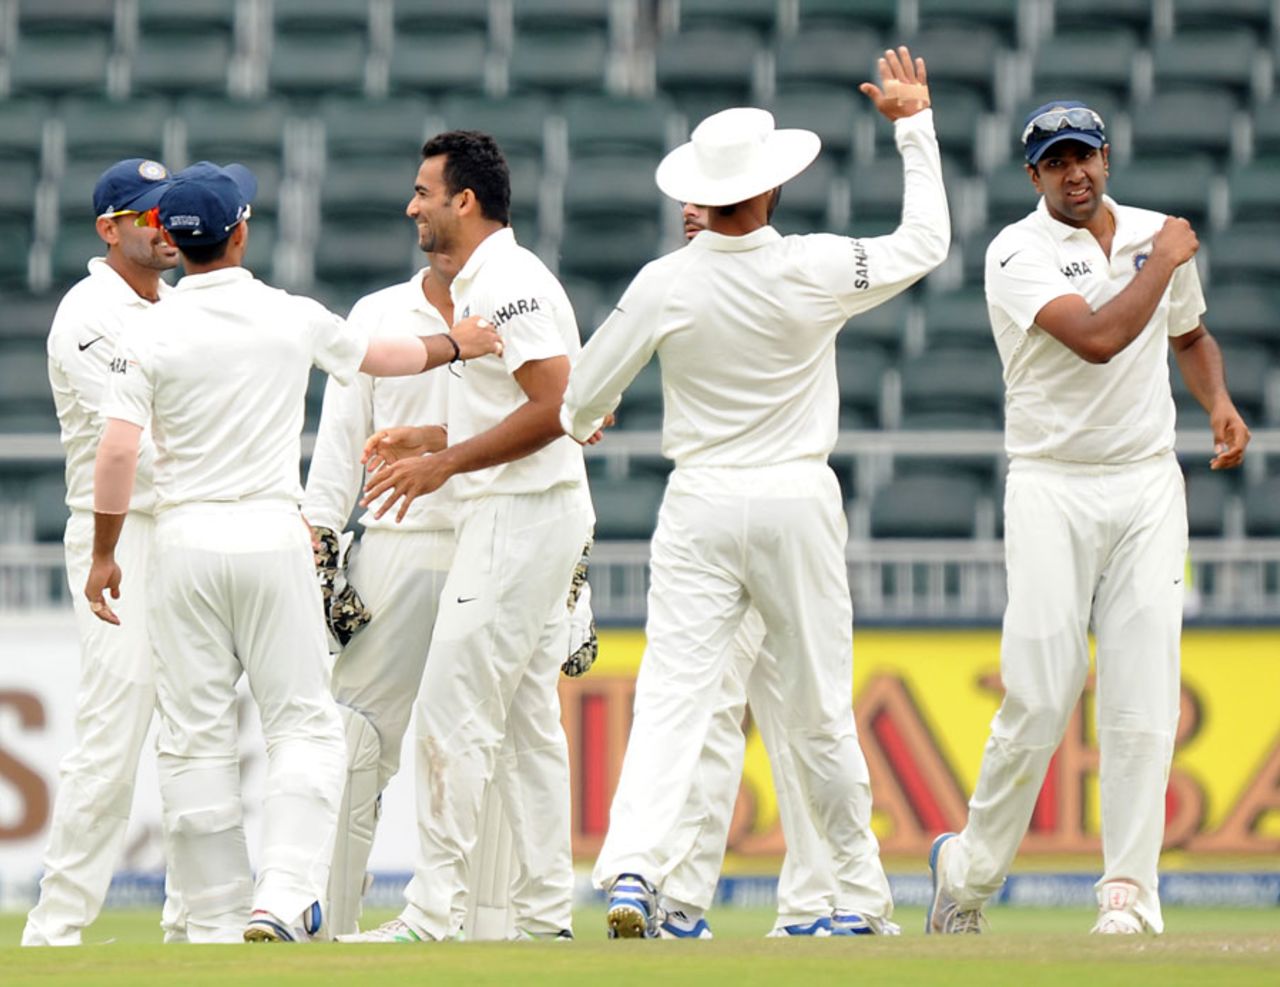 Zaheer Khan got the first wicket of the morning, South Africa v India, 1st Test, Johannesburg, 3rd day, December 20, 2013